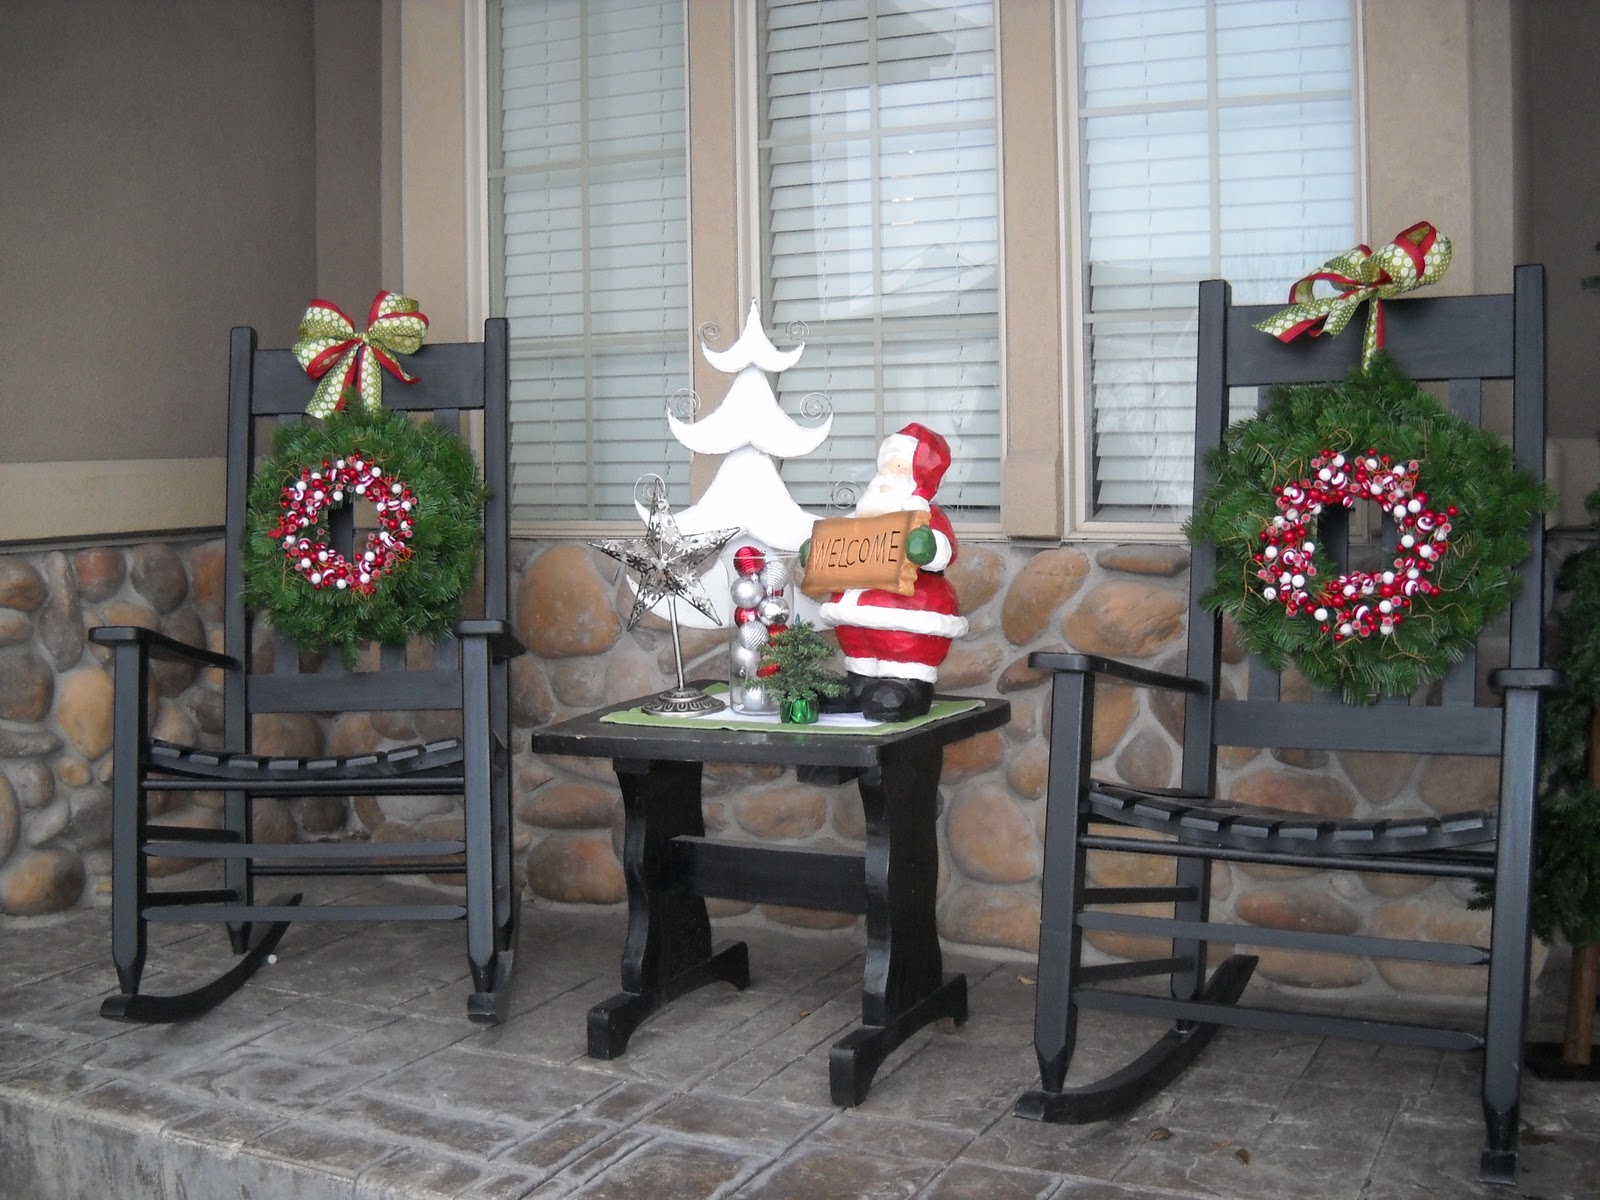 exterior-captivating-christmas-decoration-in-front-porch-with-christmas-wreath-on-black-chairs-and-white-tree-on-the-black-coffee-table-wonderful-front-porch-christmas-decorating-ideas.